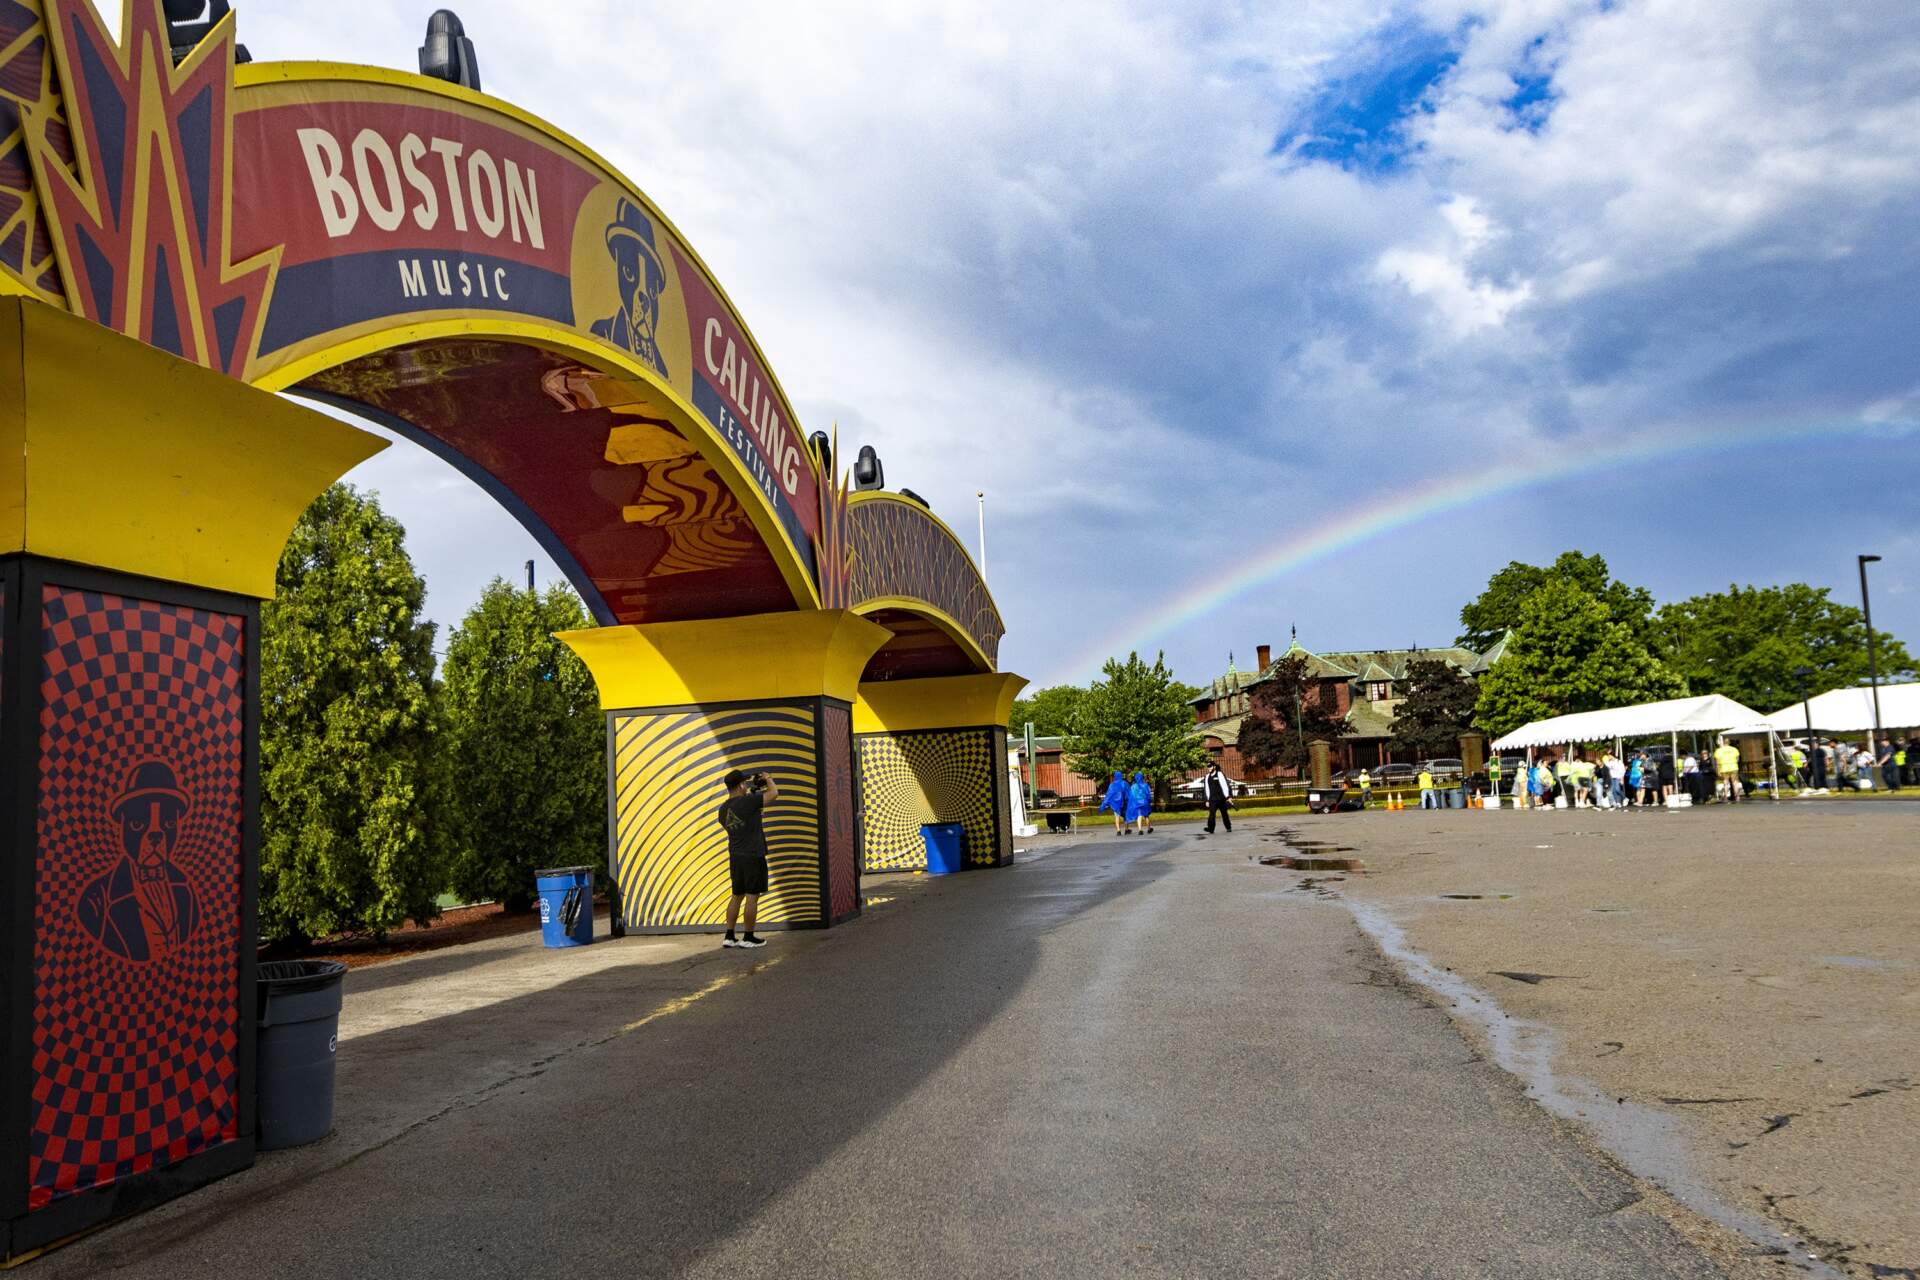 A rainbow appears after a severe thunderstorm rolled through Boston at the 2022 Boston Calling Music Festival. (Jesse Costa/WBUR)